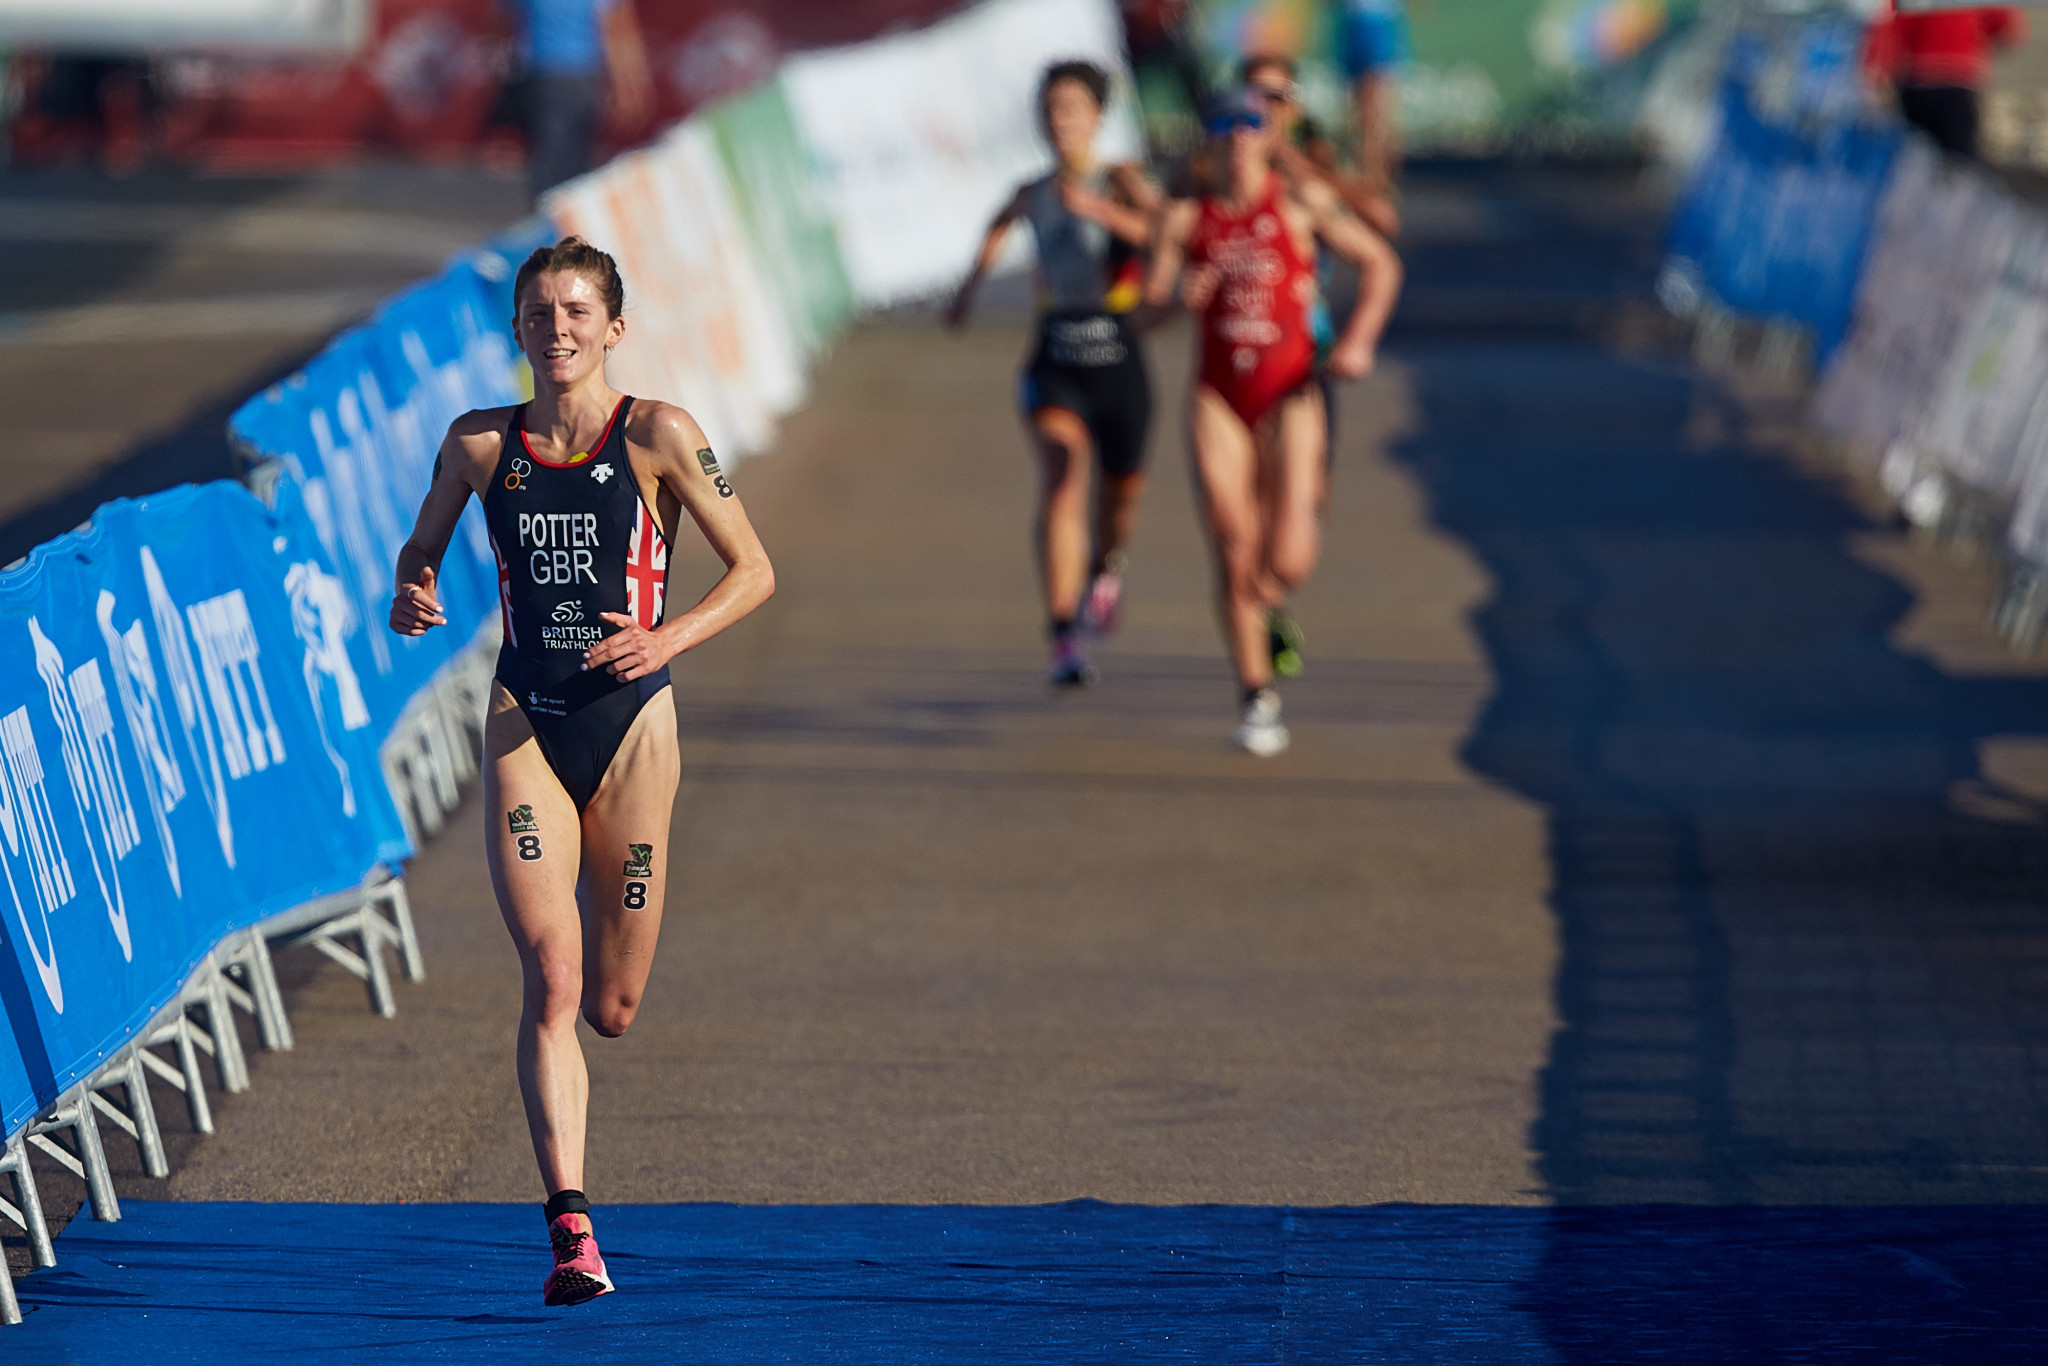 British women looking to continue success as World Triathlon Cup stays in South Korea